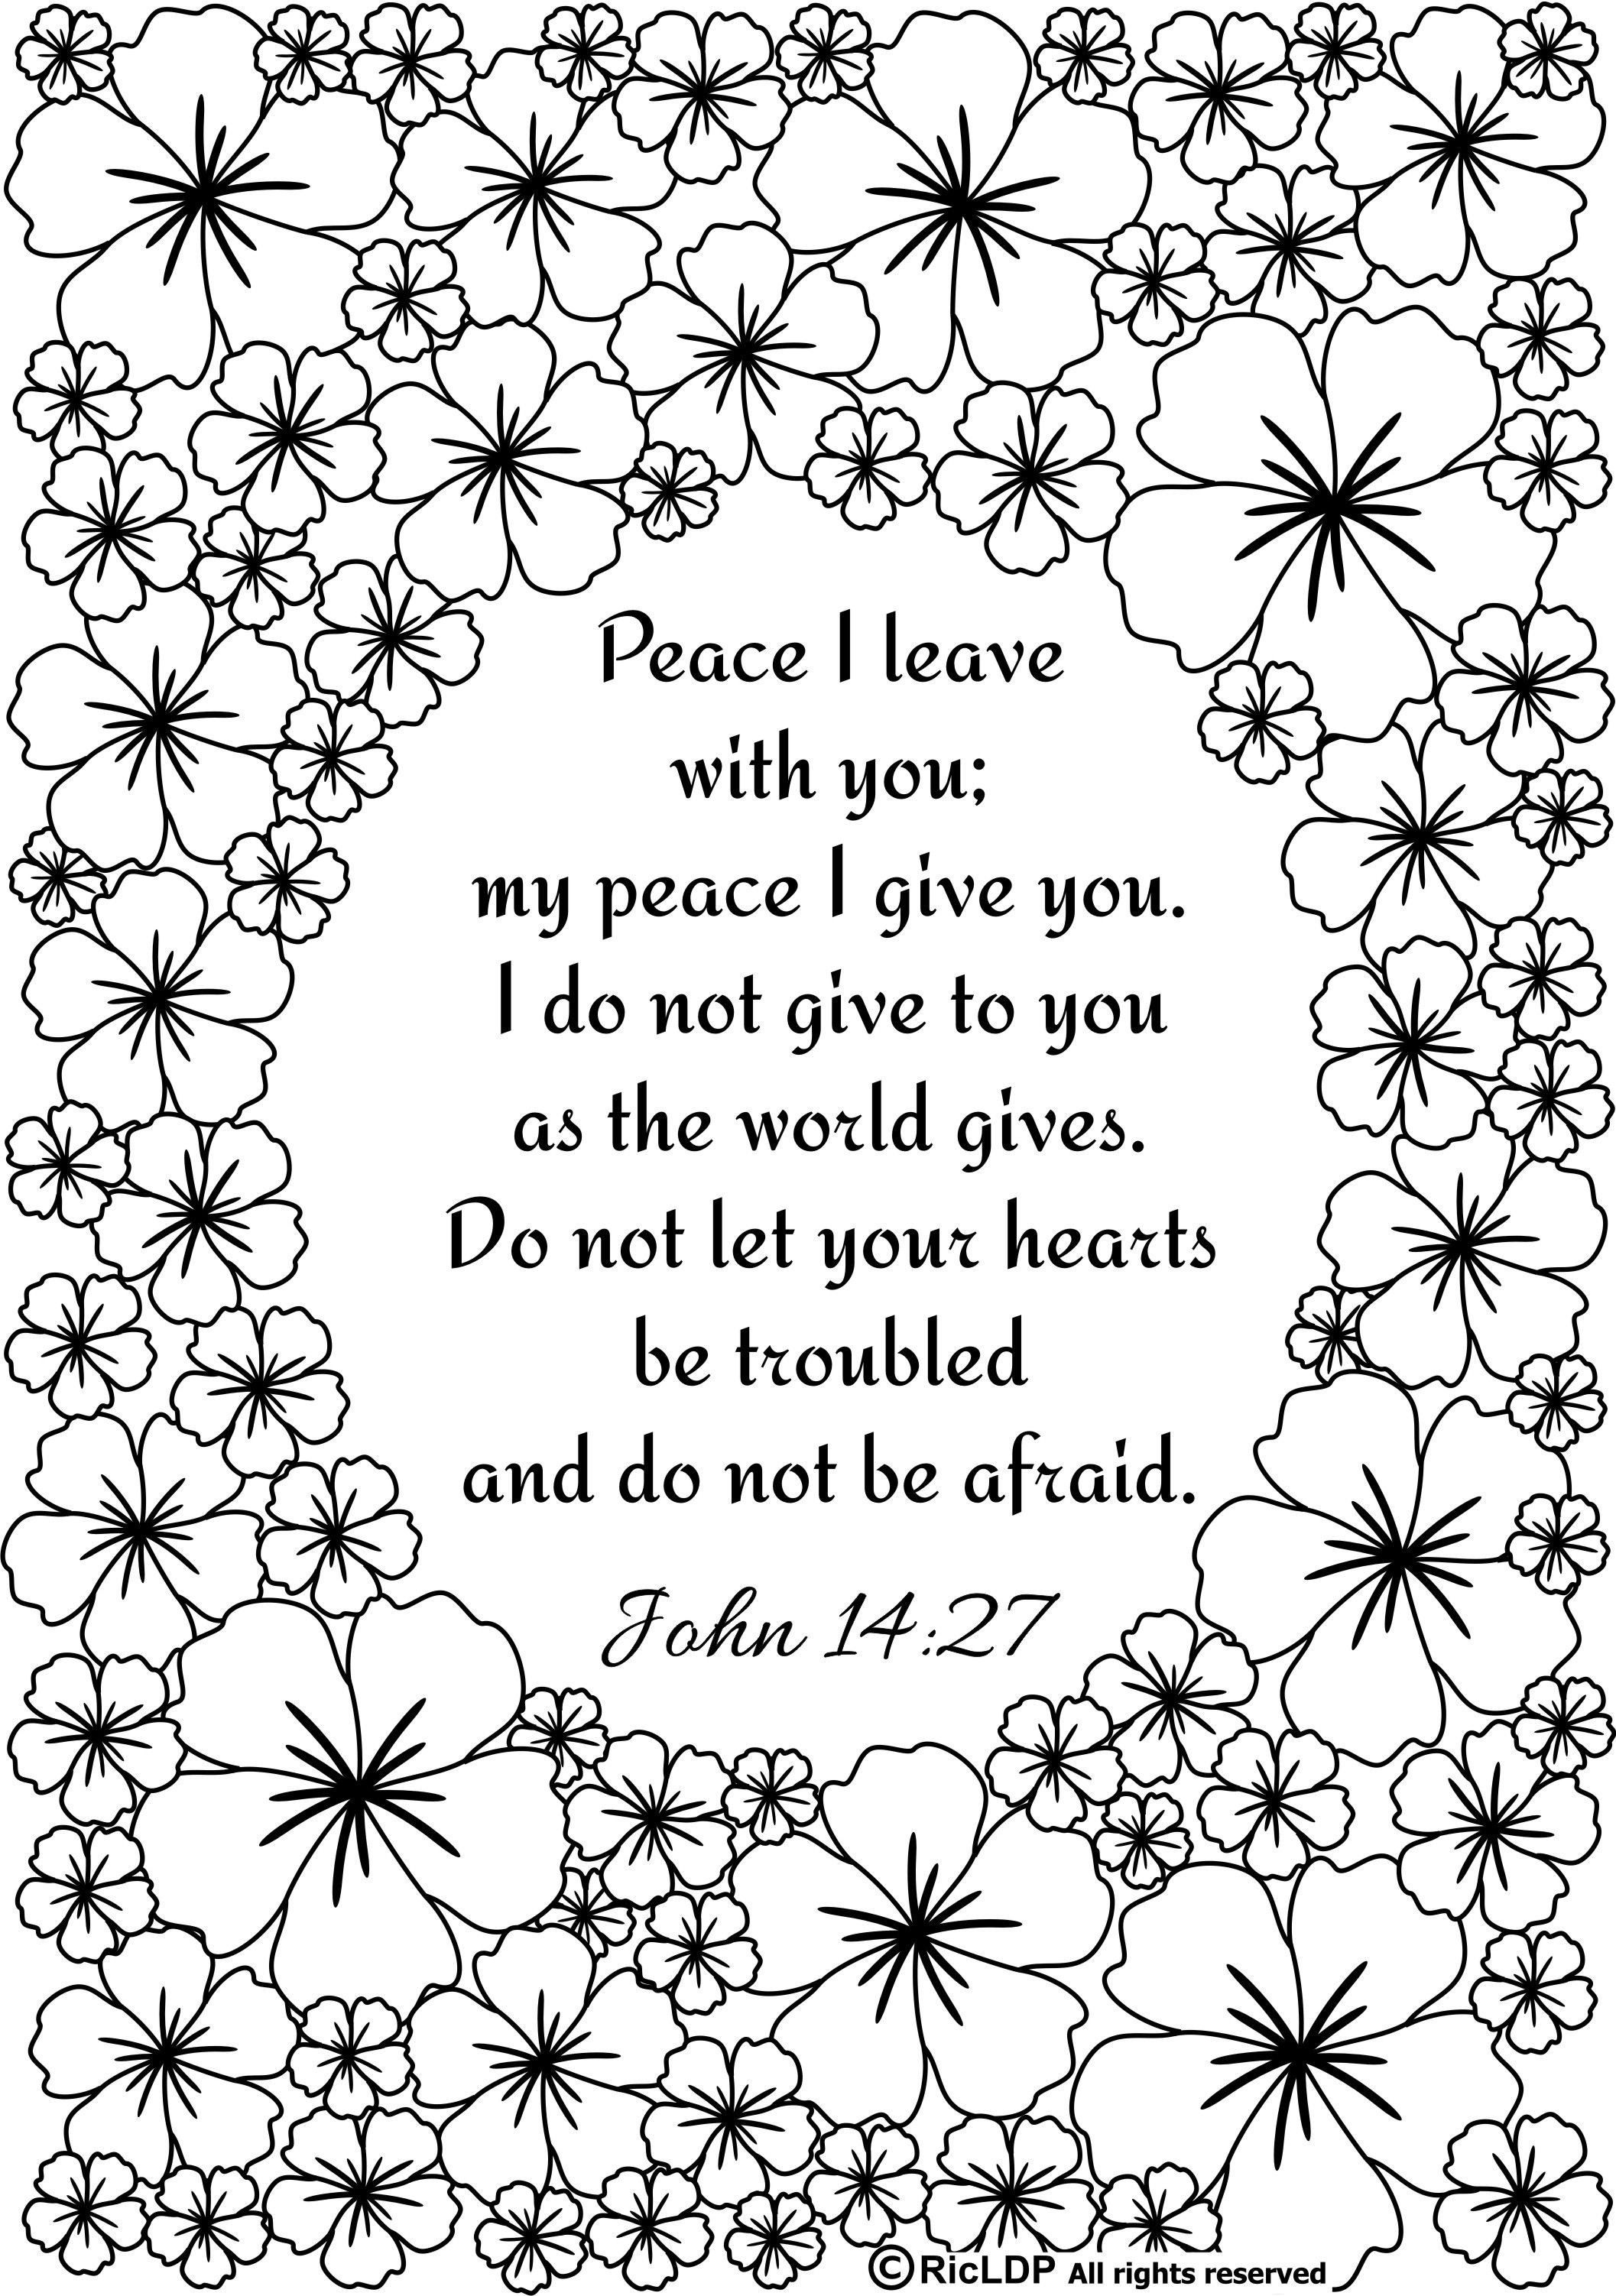 Ricldp Artworks (Ricldp) | Coloring Pages!!! | Bible Verse Coloring - Free Printable Bible Coloring Pages With Scriptures